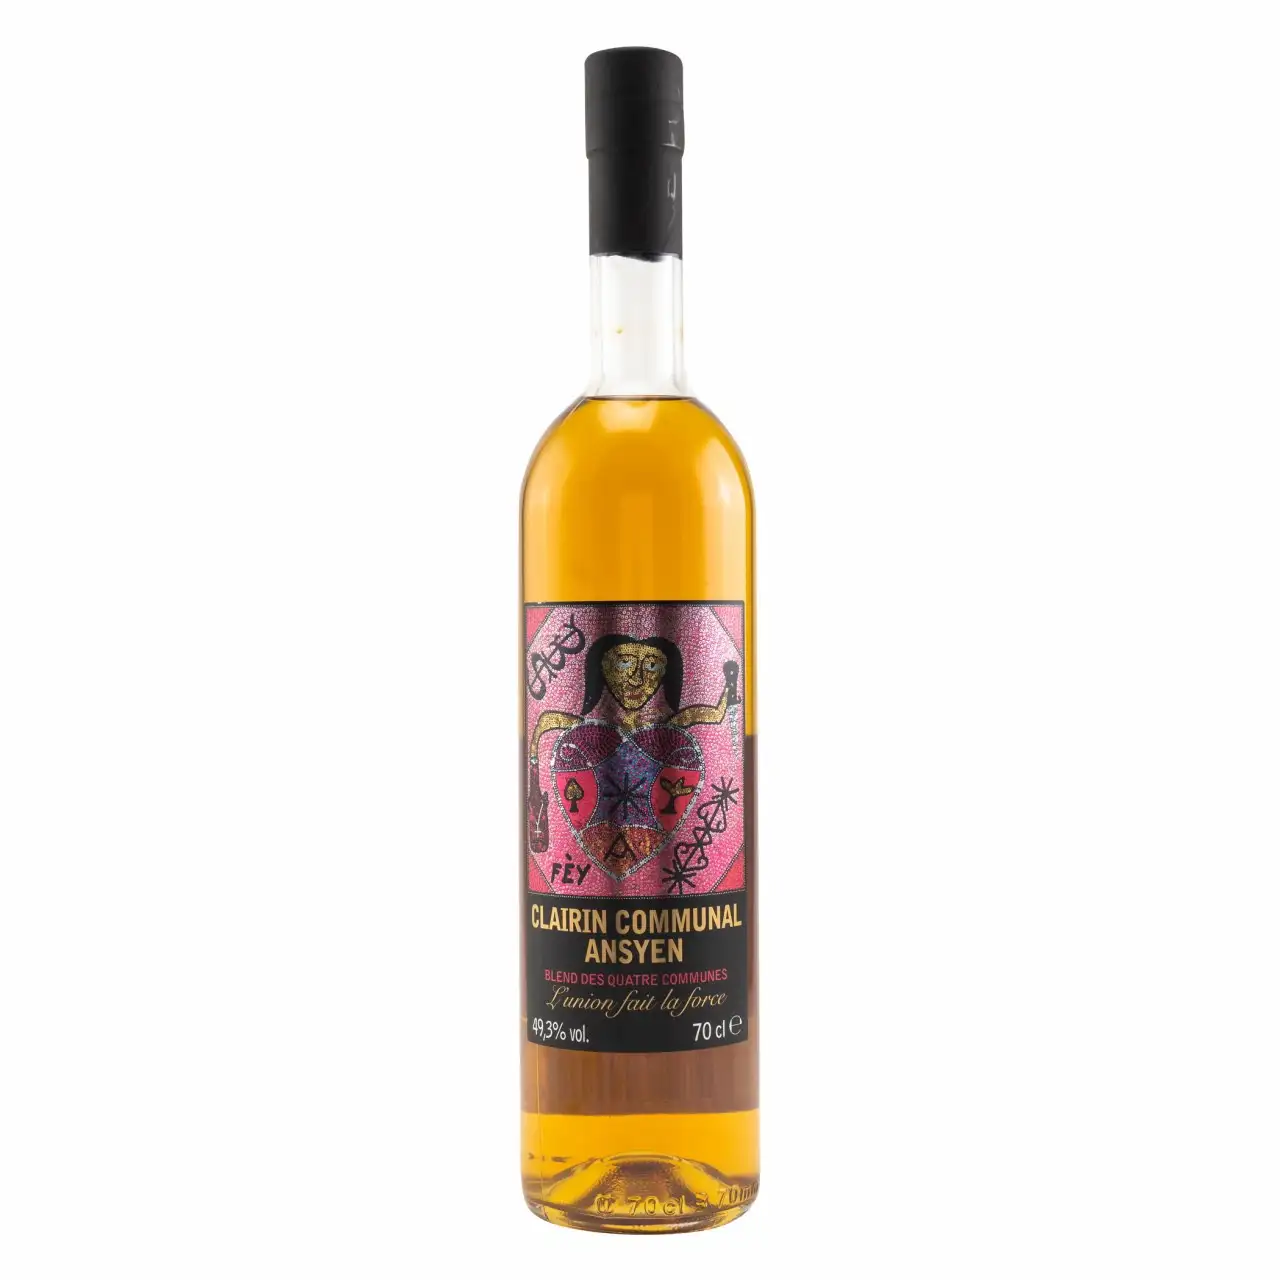 Image of the front of the bottle of the rum Clairin Communal Ansyen (Blend des quatre communes)